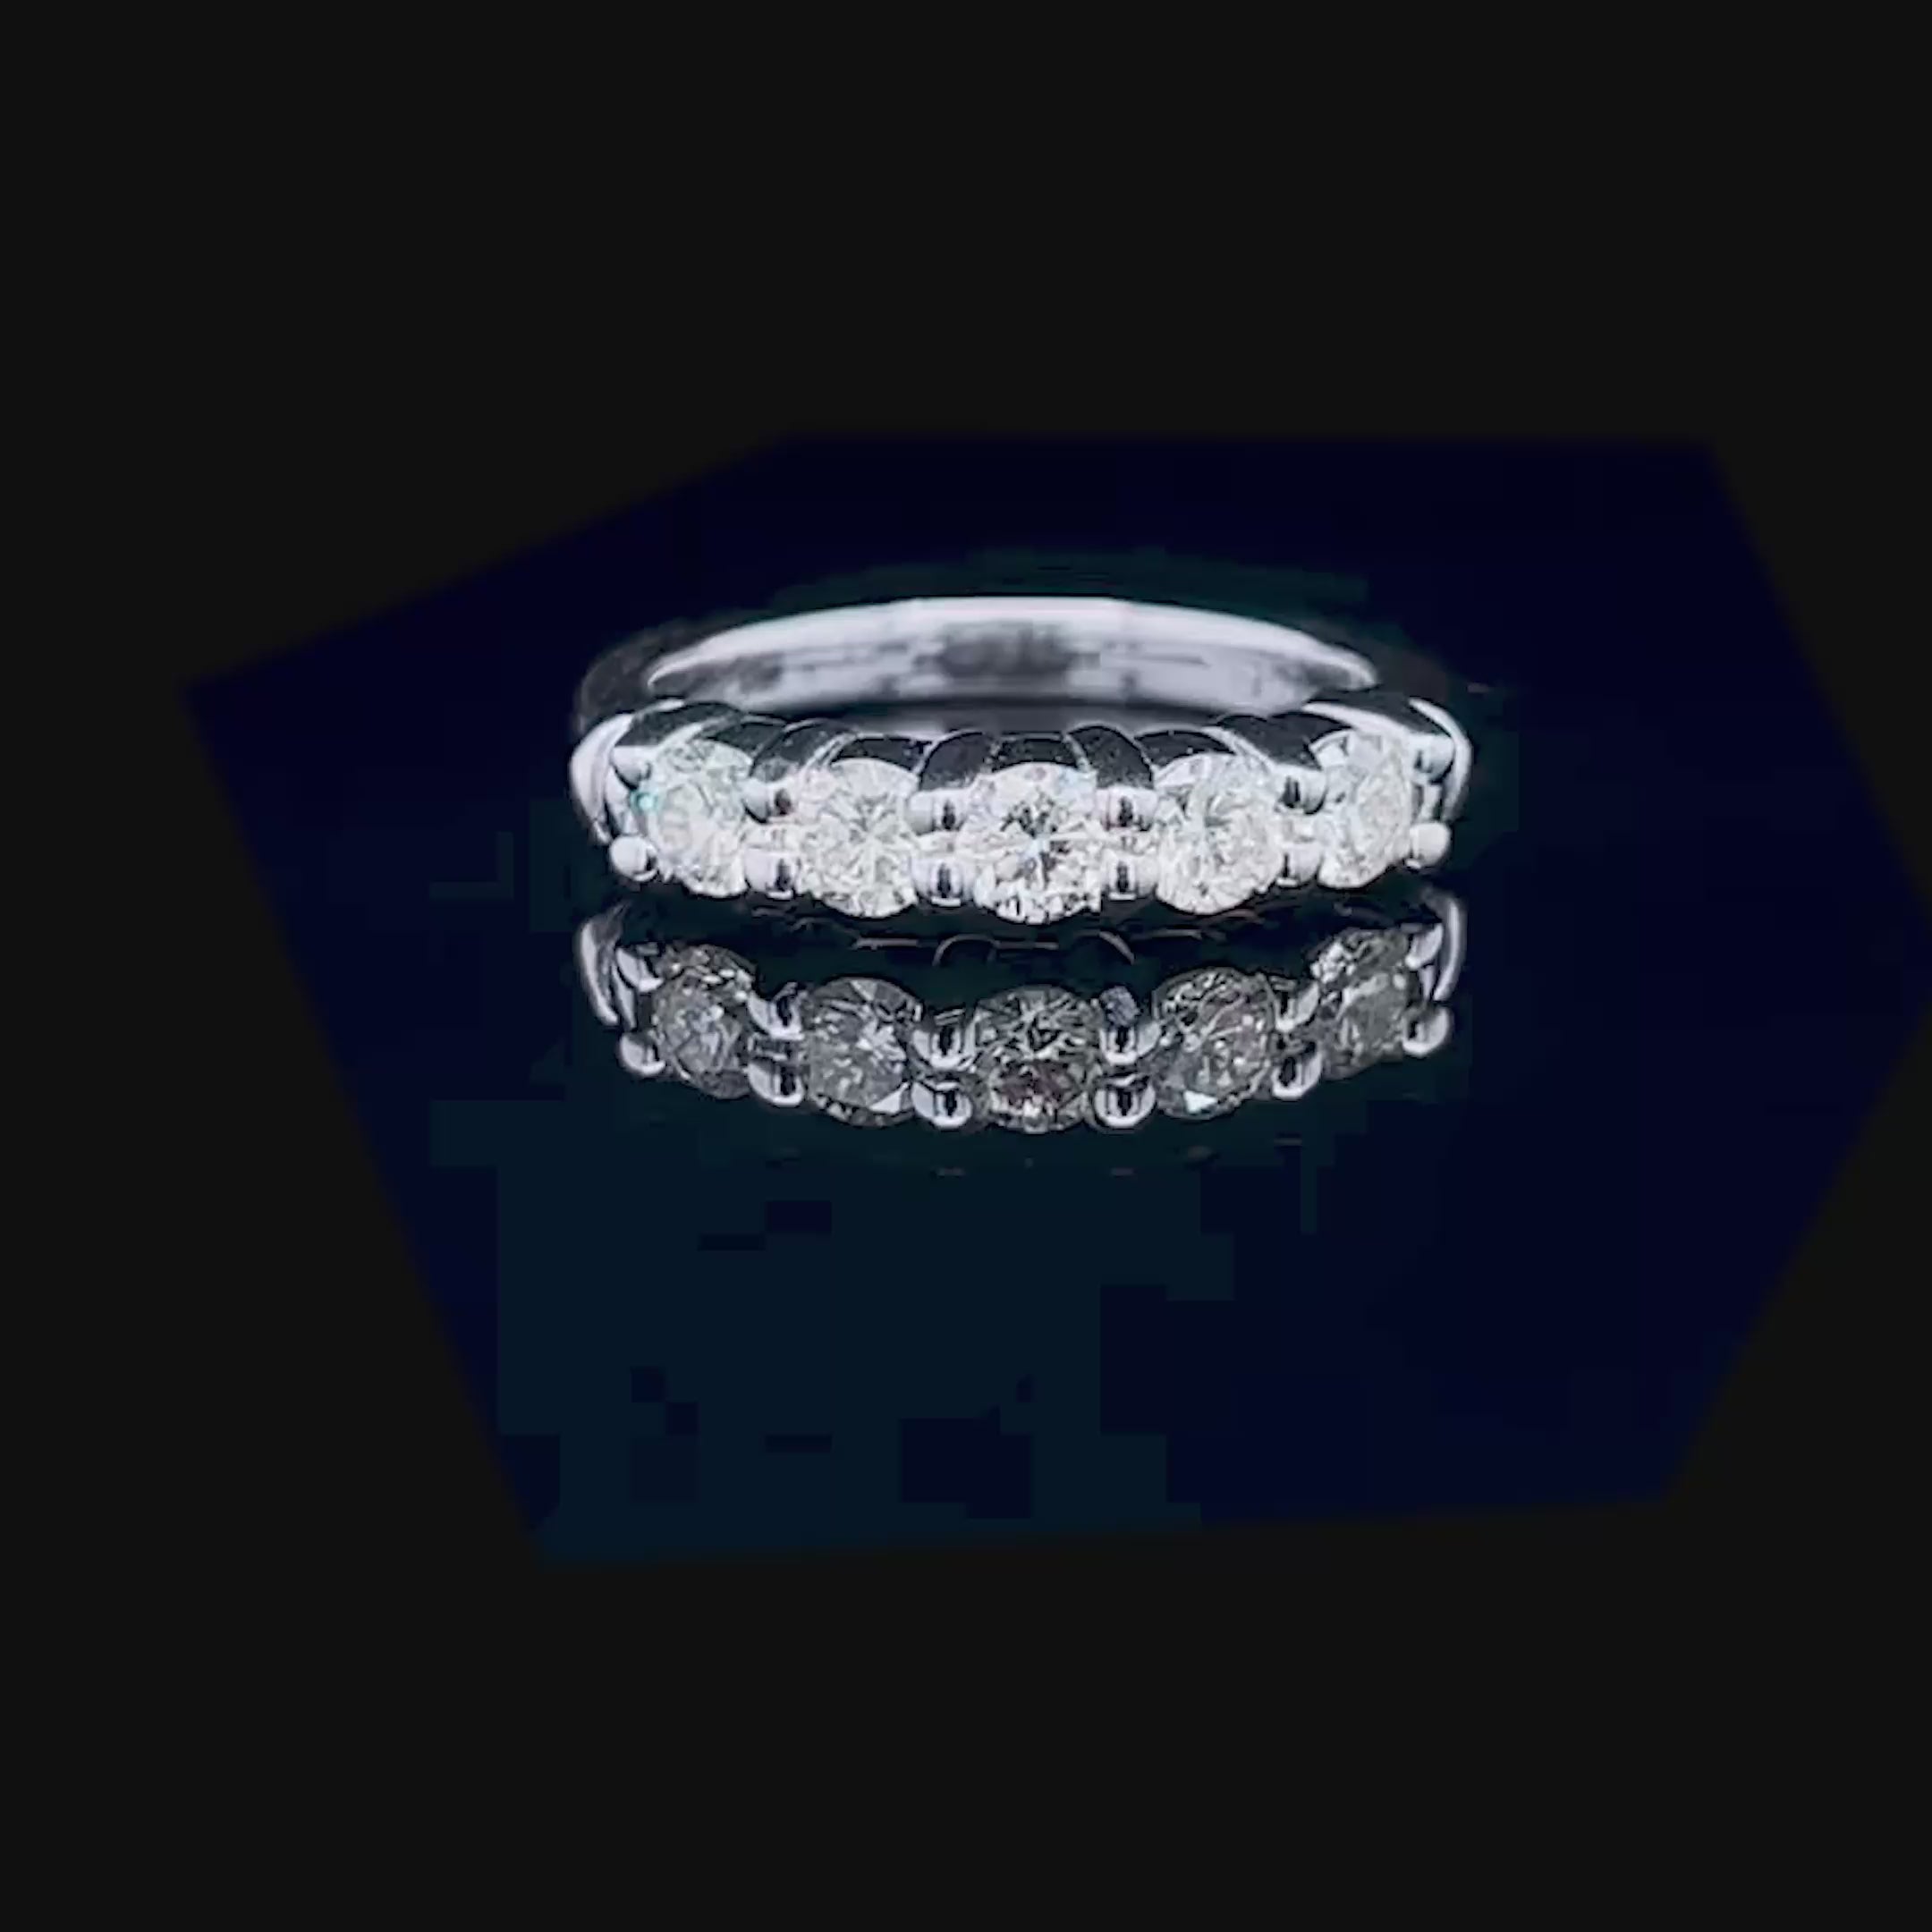 Exclusive 0.80CT Round Cut Diamond Wedding Band in 14KT White Gold